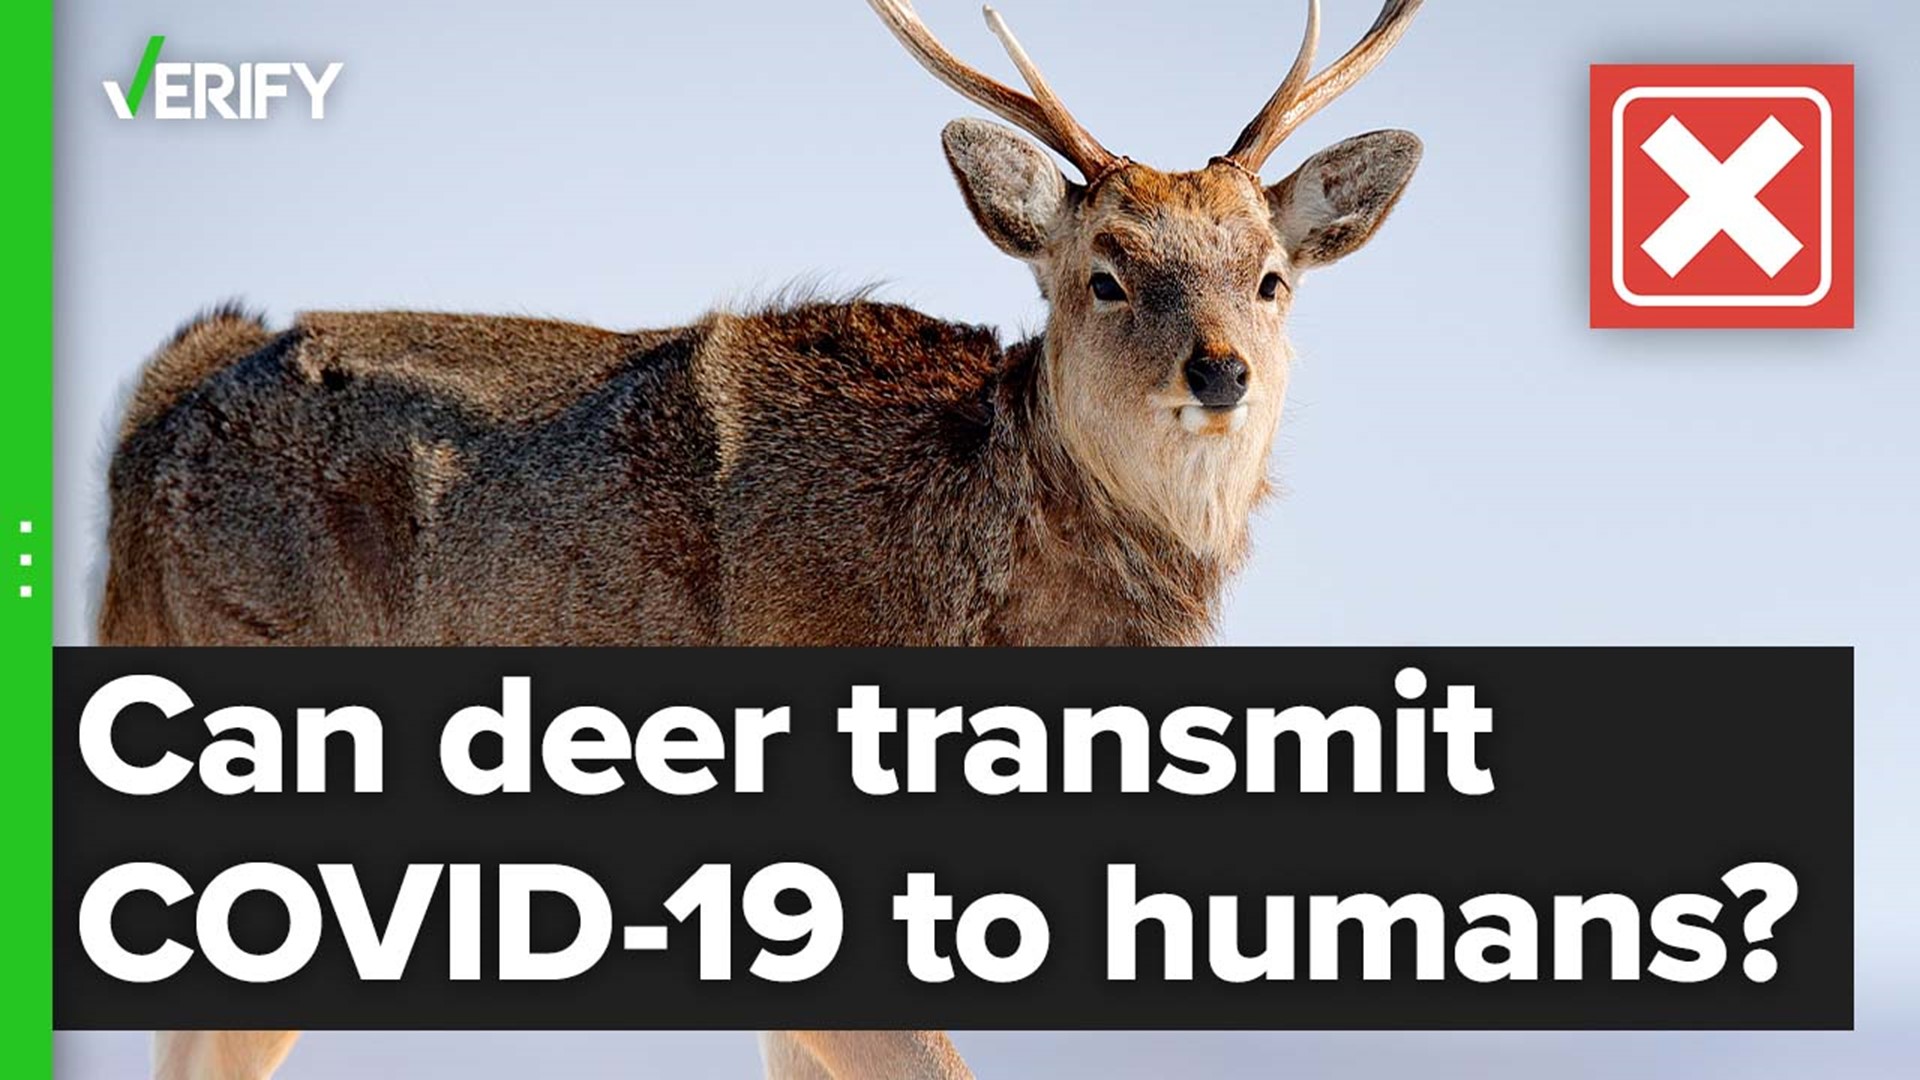 Some health officials suggest hunters wear a mask while handling and cleaning deer carcasses.